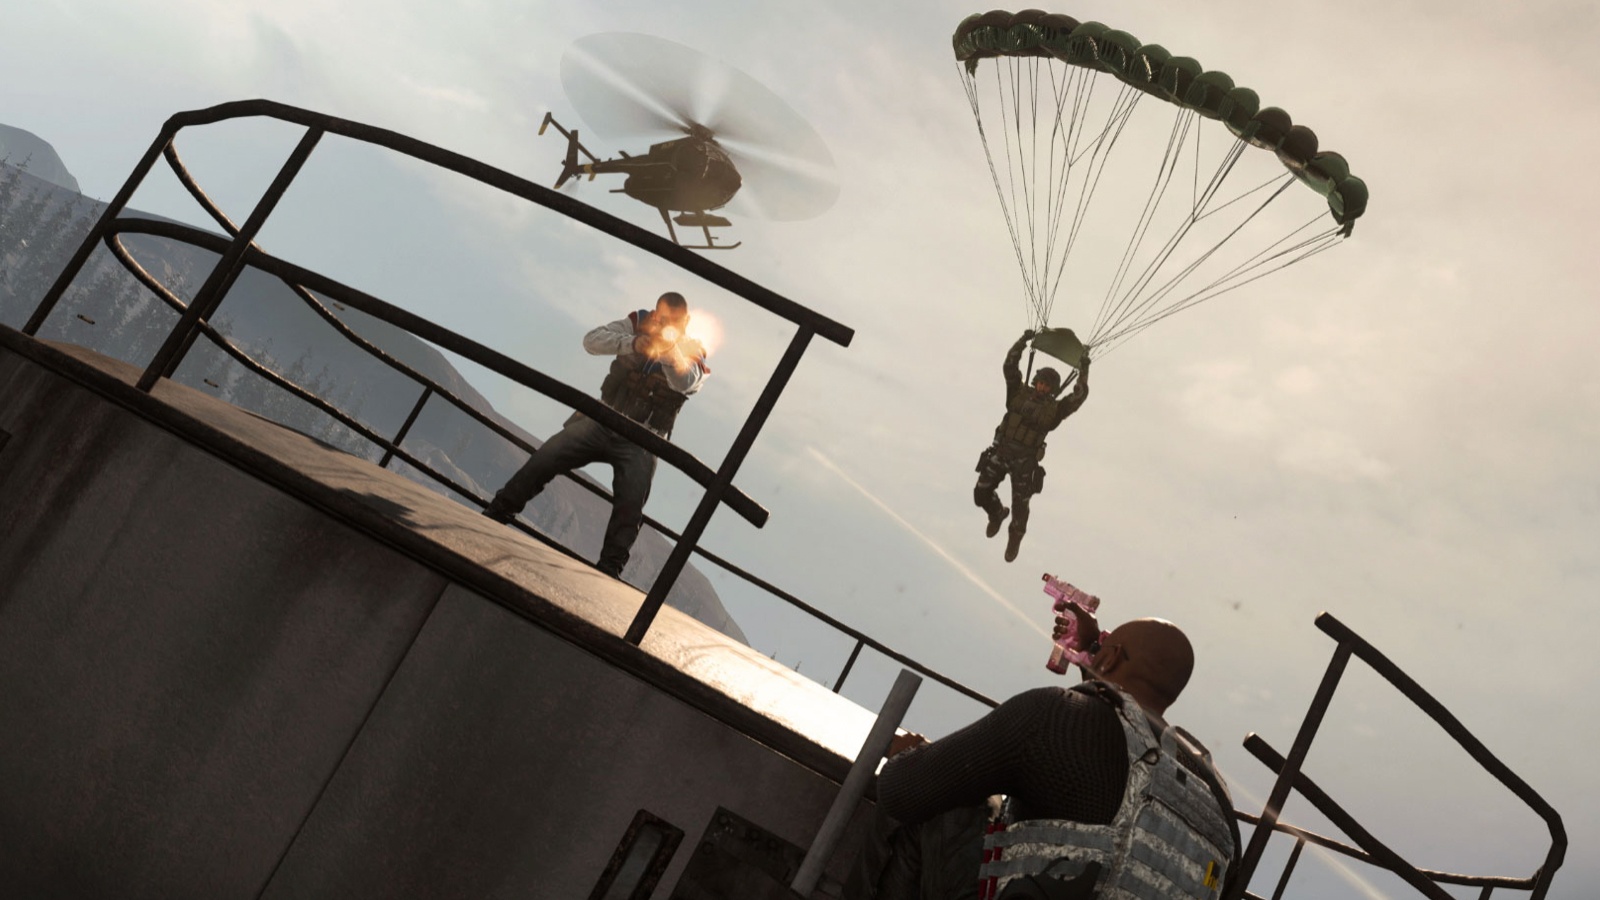 Warzone 2 dual-wield pistols are completely breaking parachutes